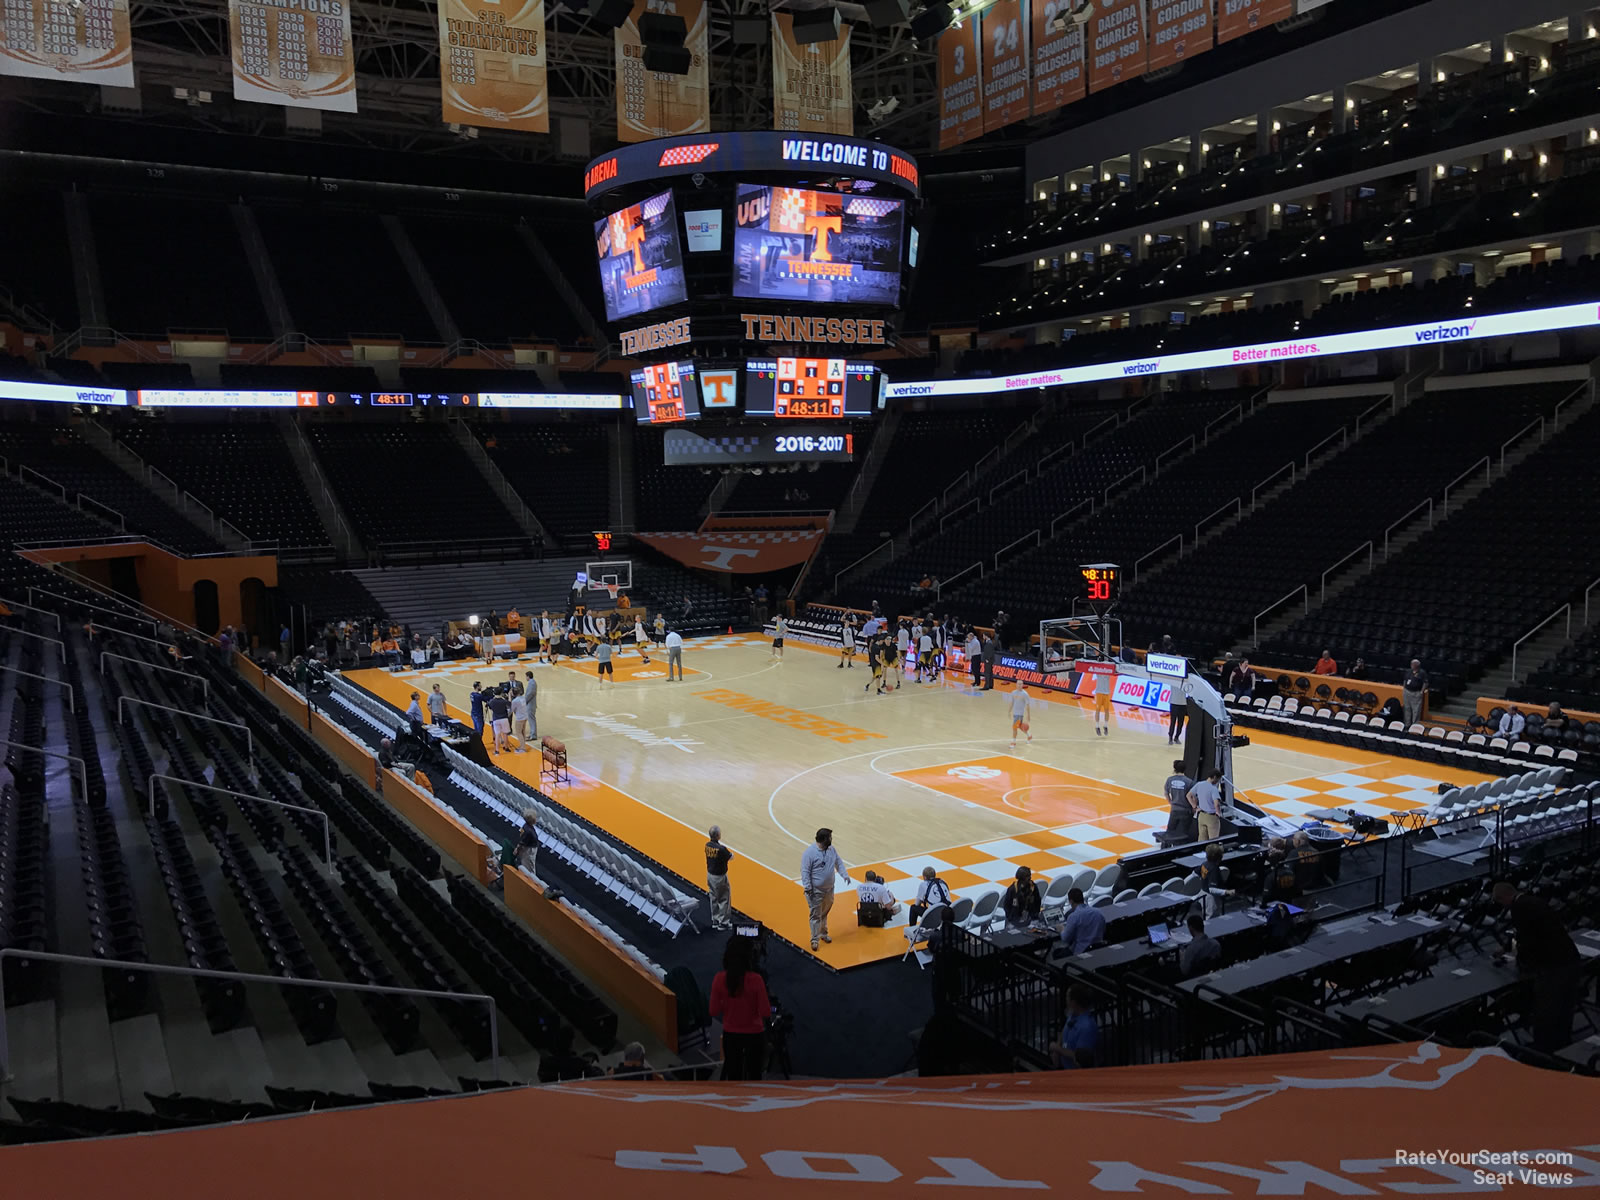 Section 116 at ThompsonBoling Arena